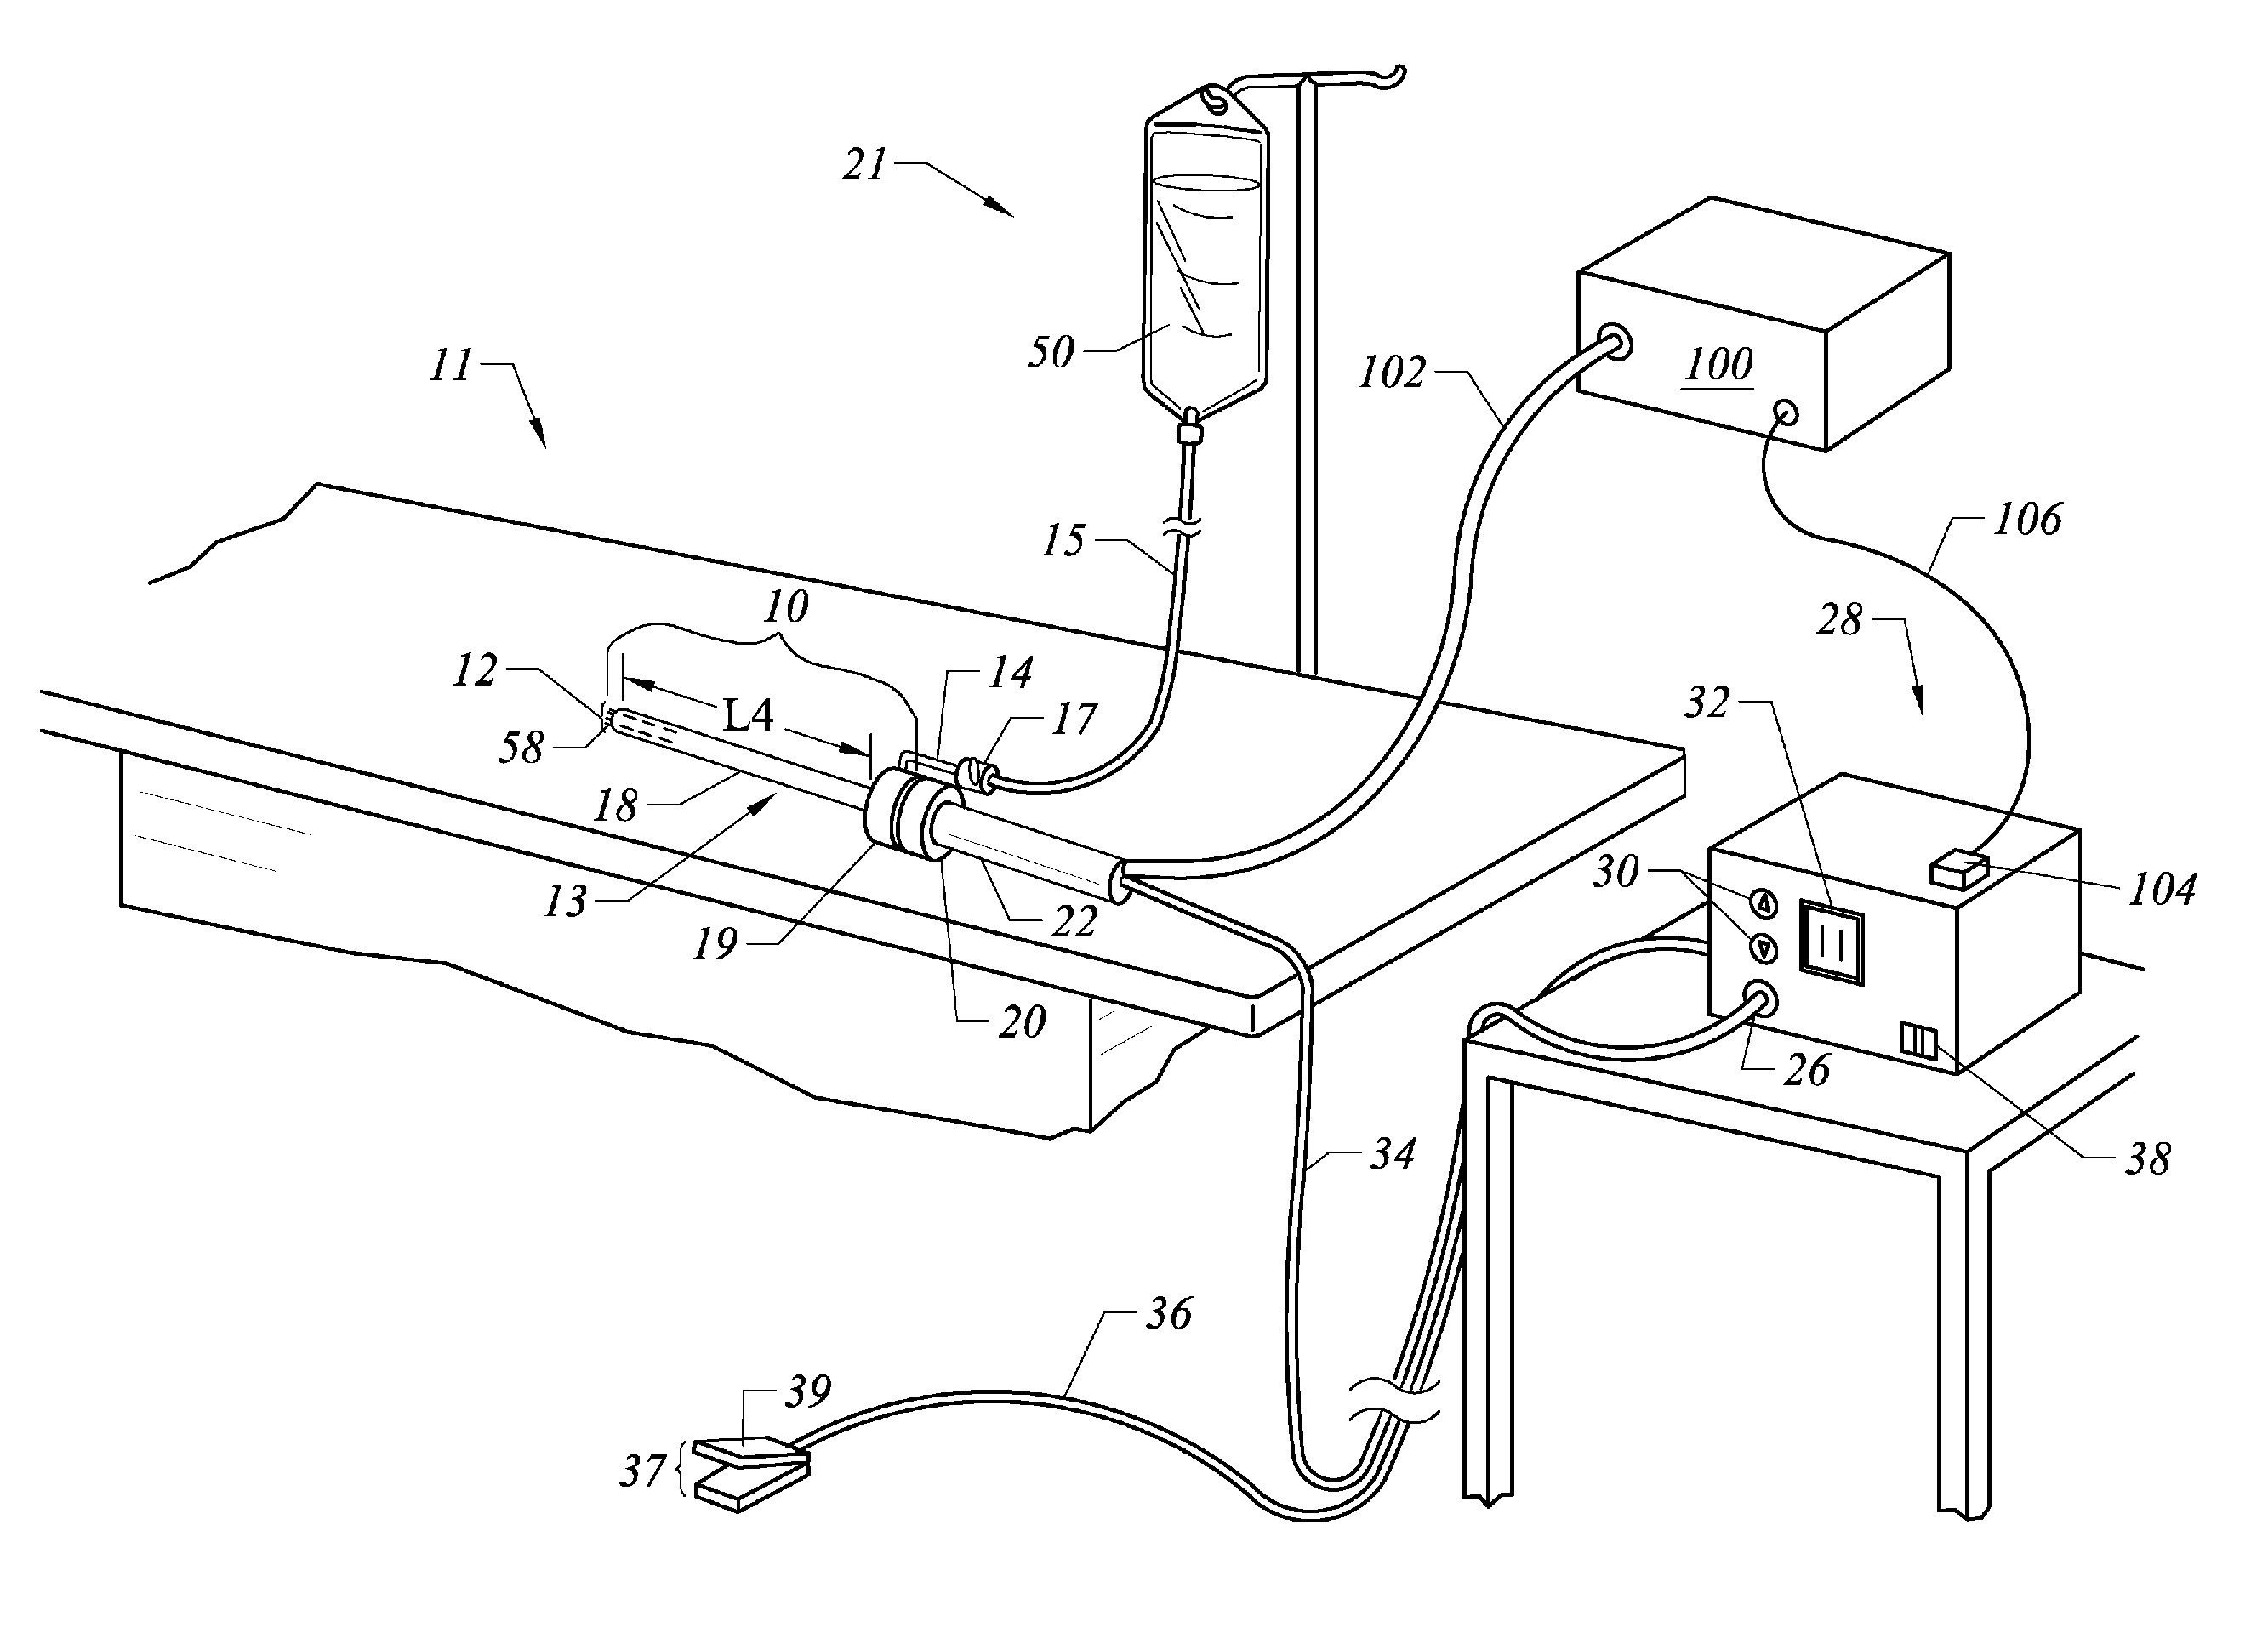 Electrosurgical system with suction control apparatus, system and method